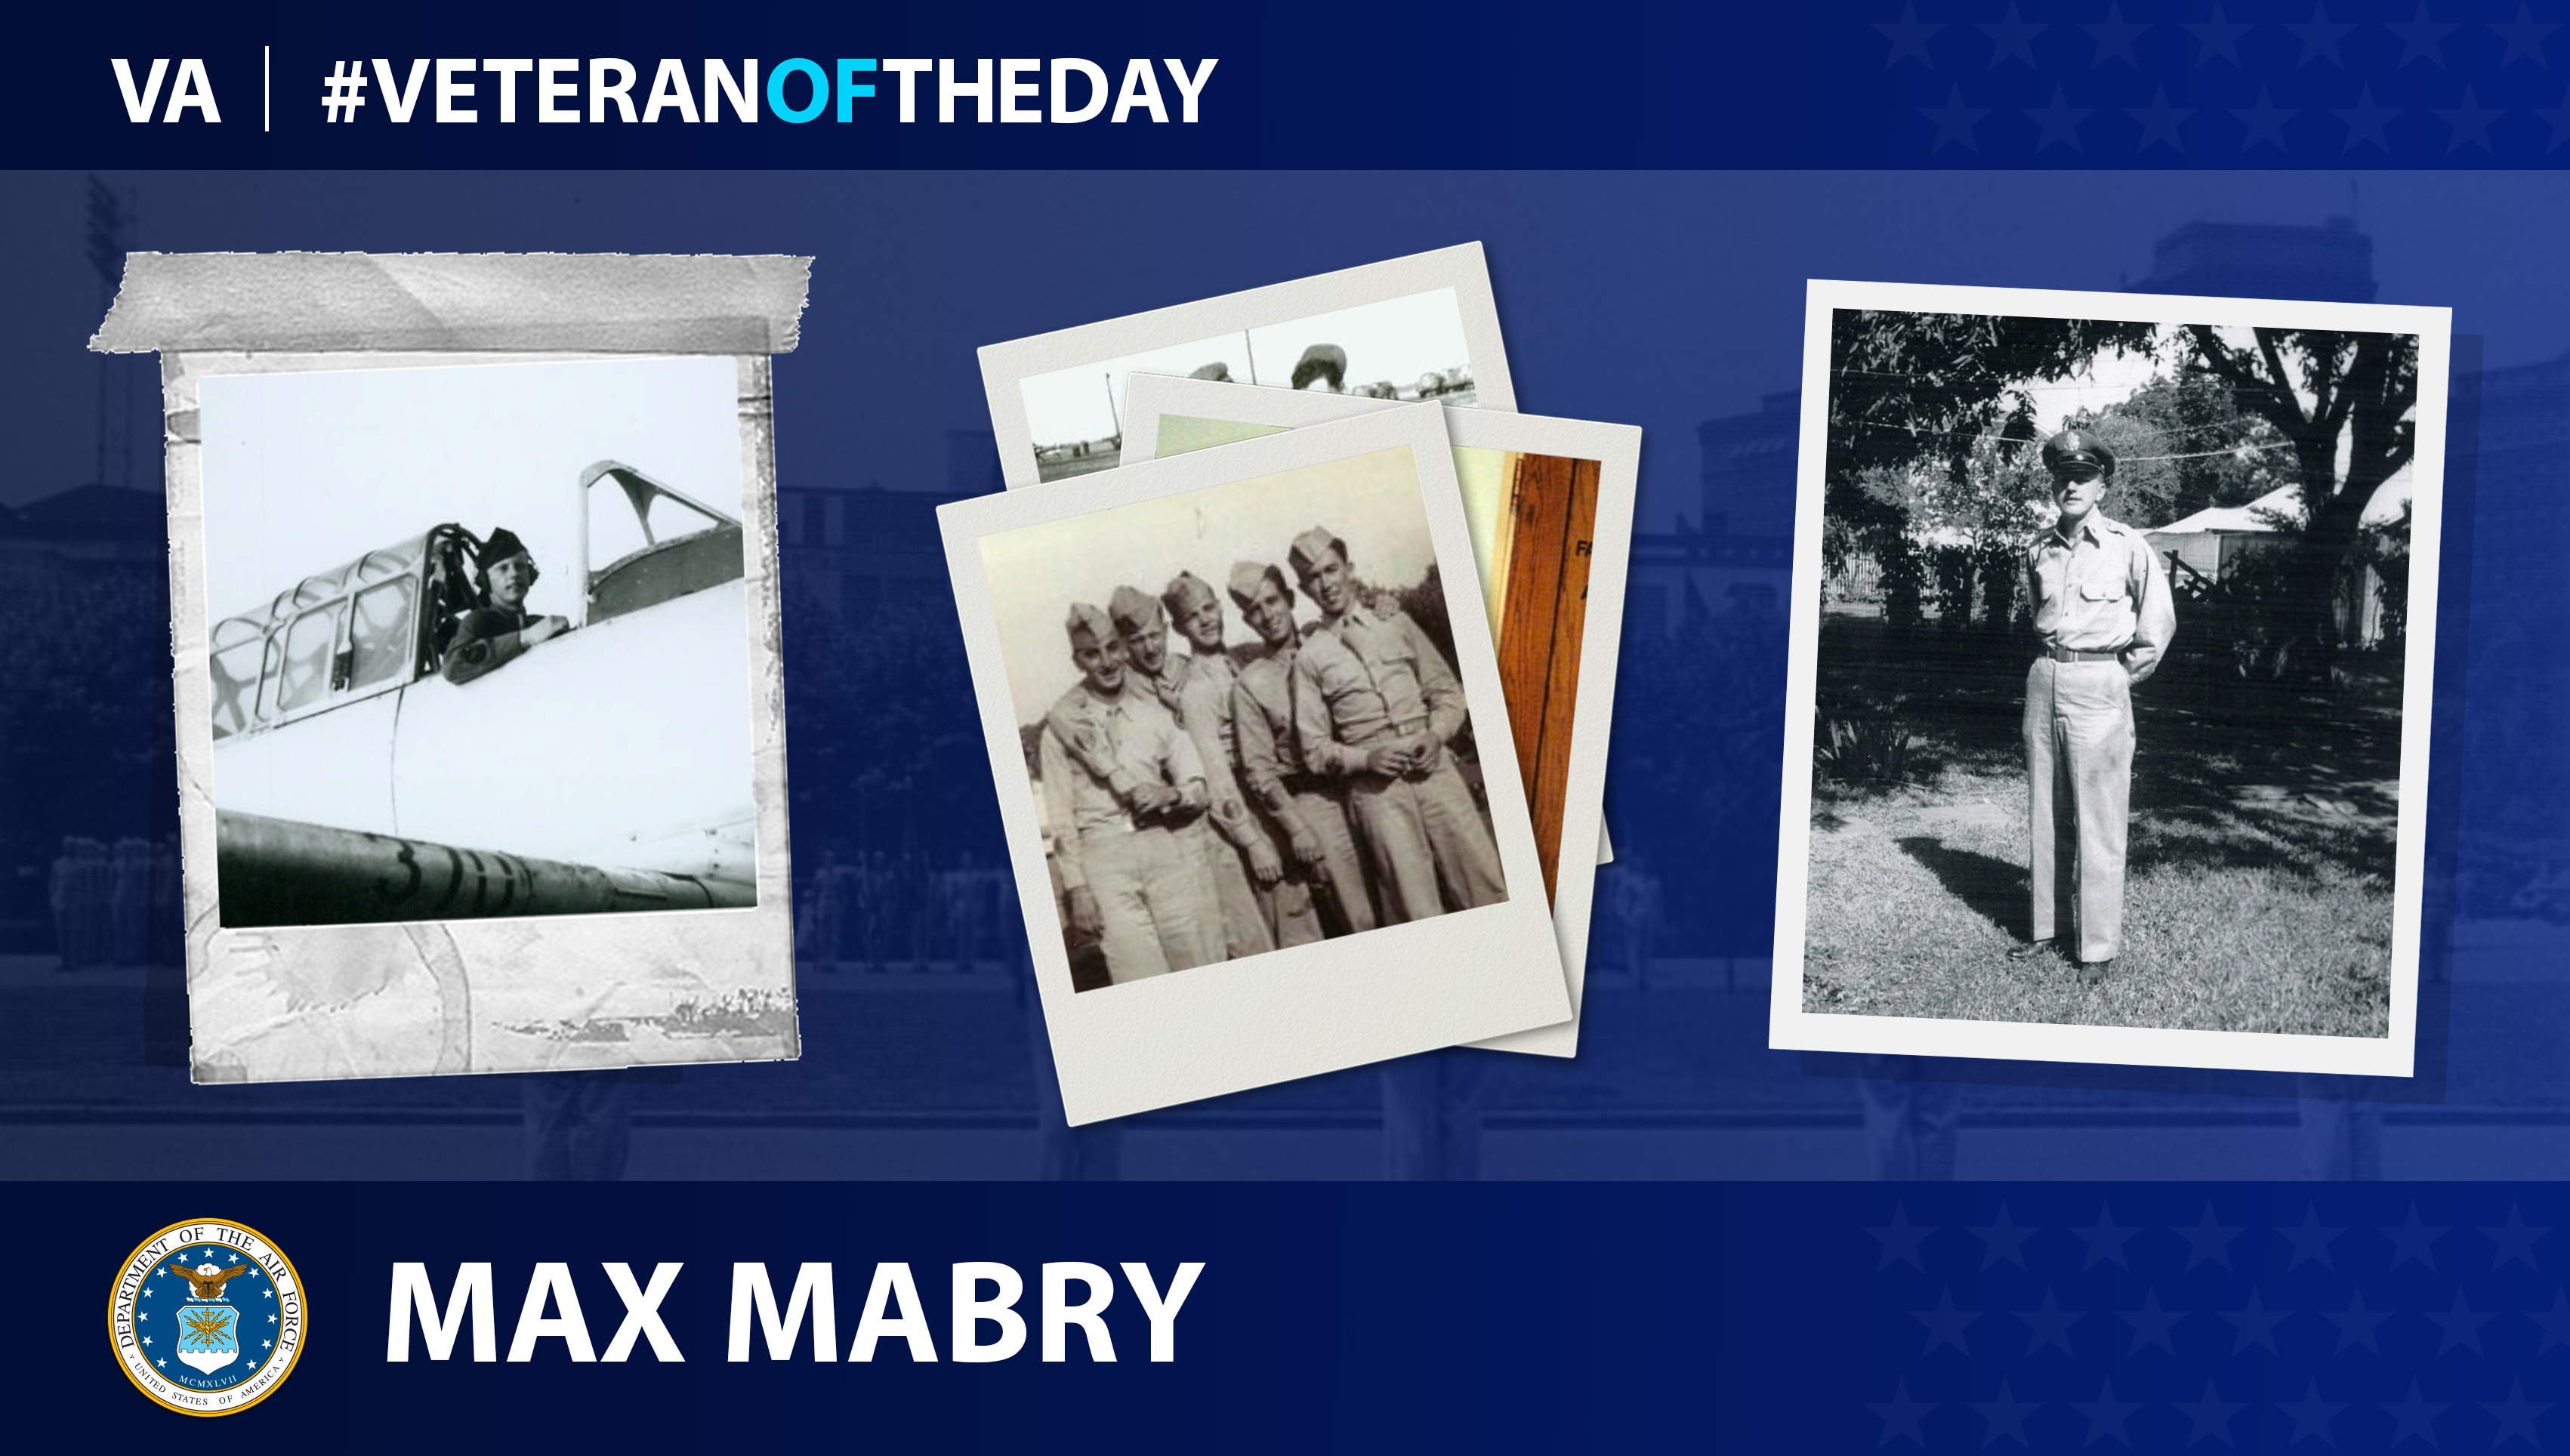 Air Force Veteran Max E. Mabry is today's Veteran of the day.